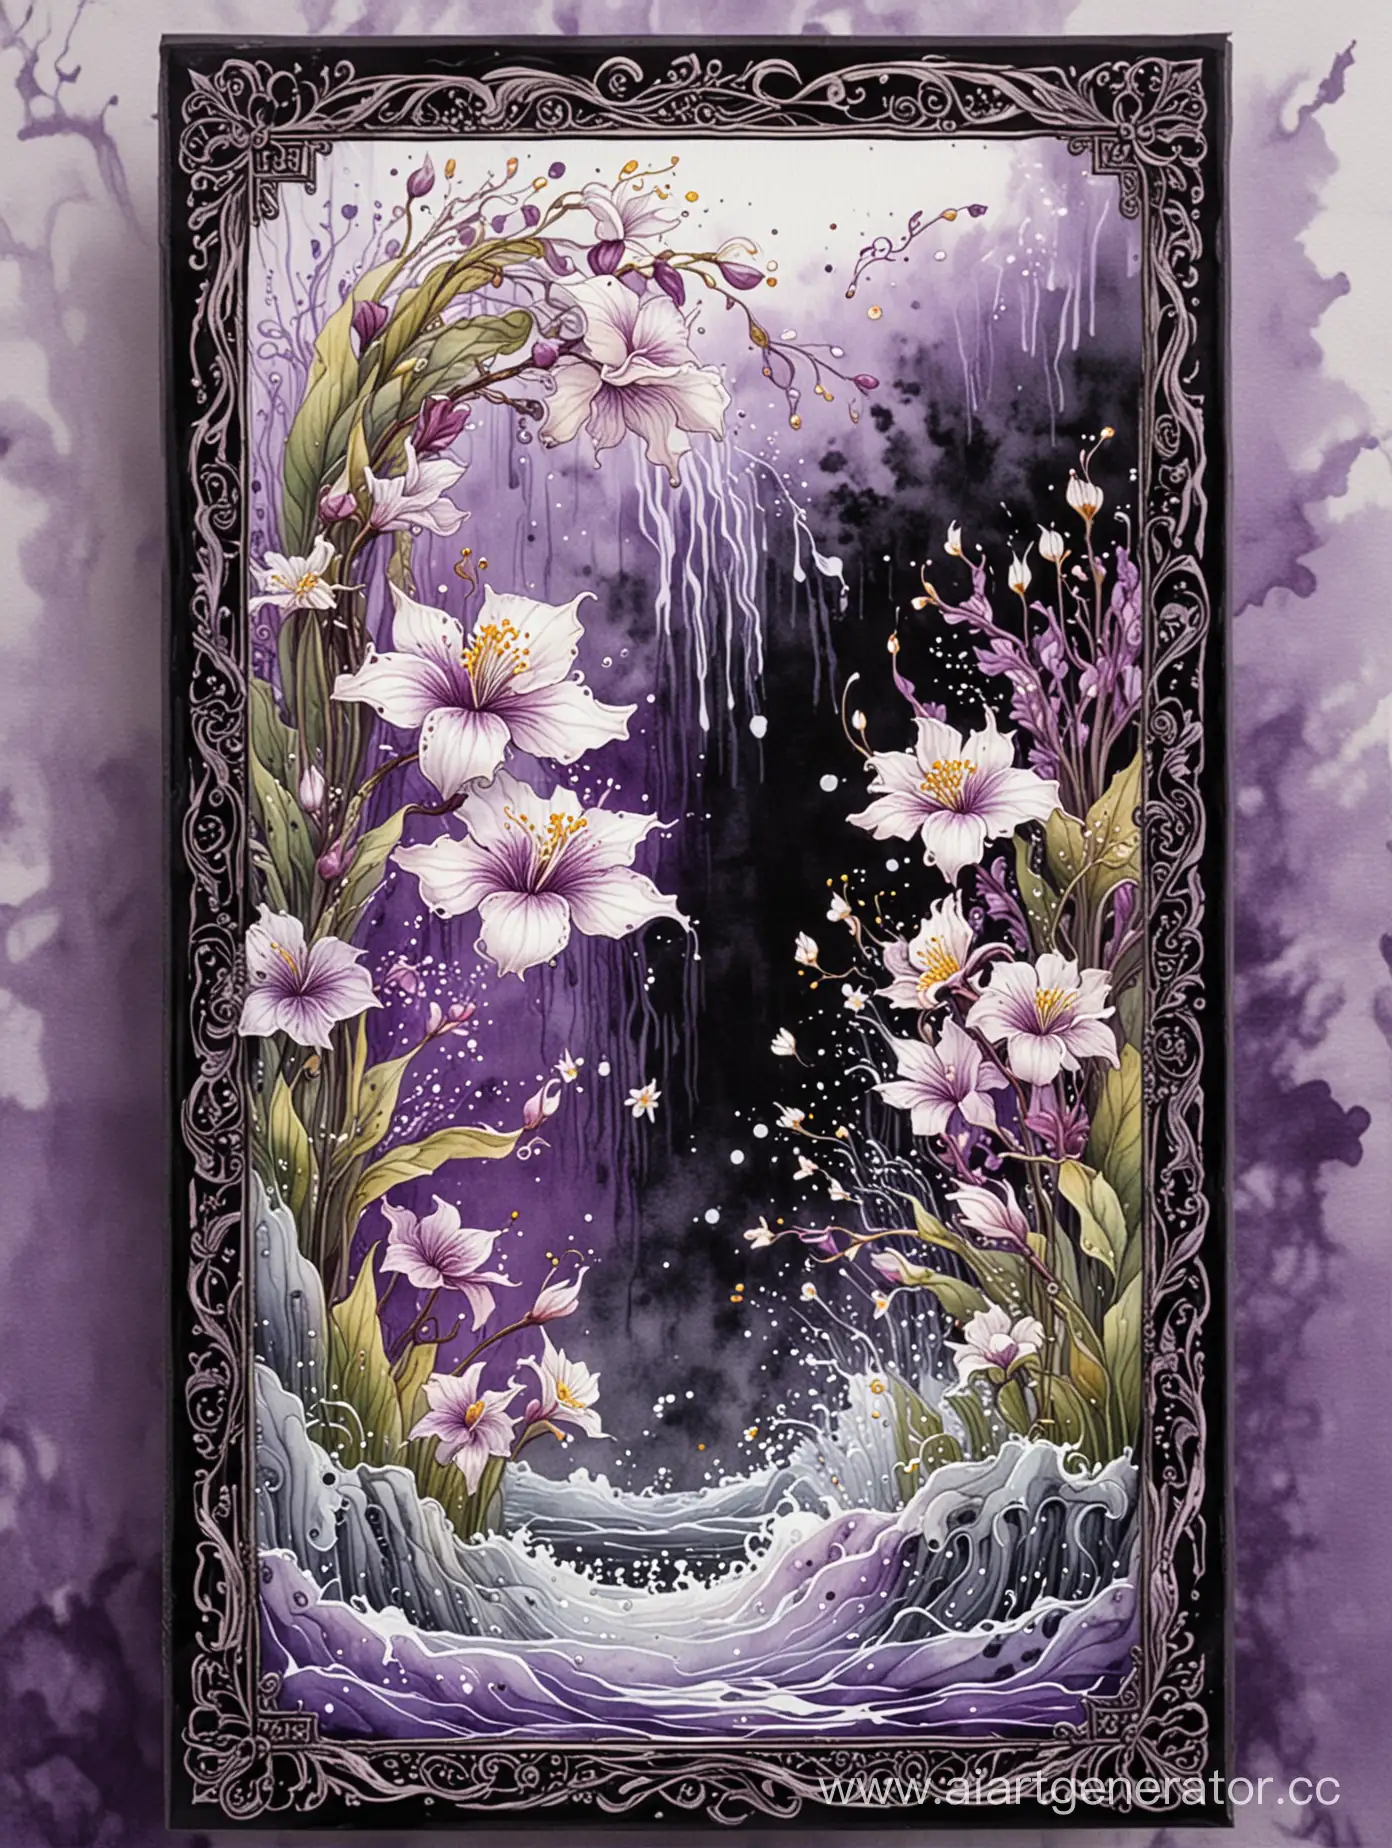 Watercolor-Tarot-Card-Intricate-Design-on-BlackPurple-Marble-Background